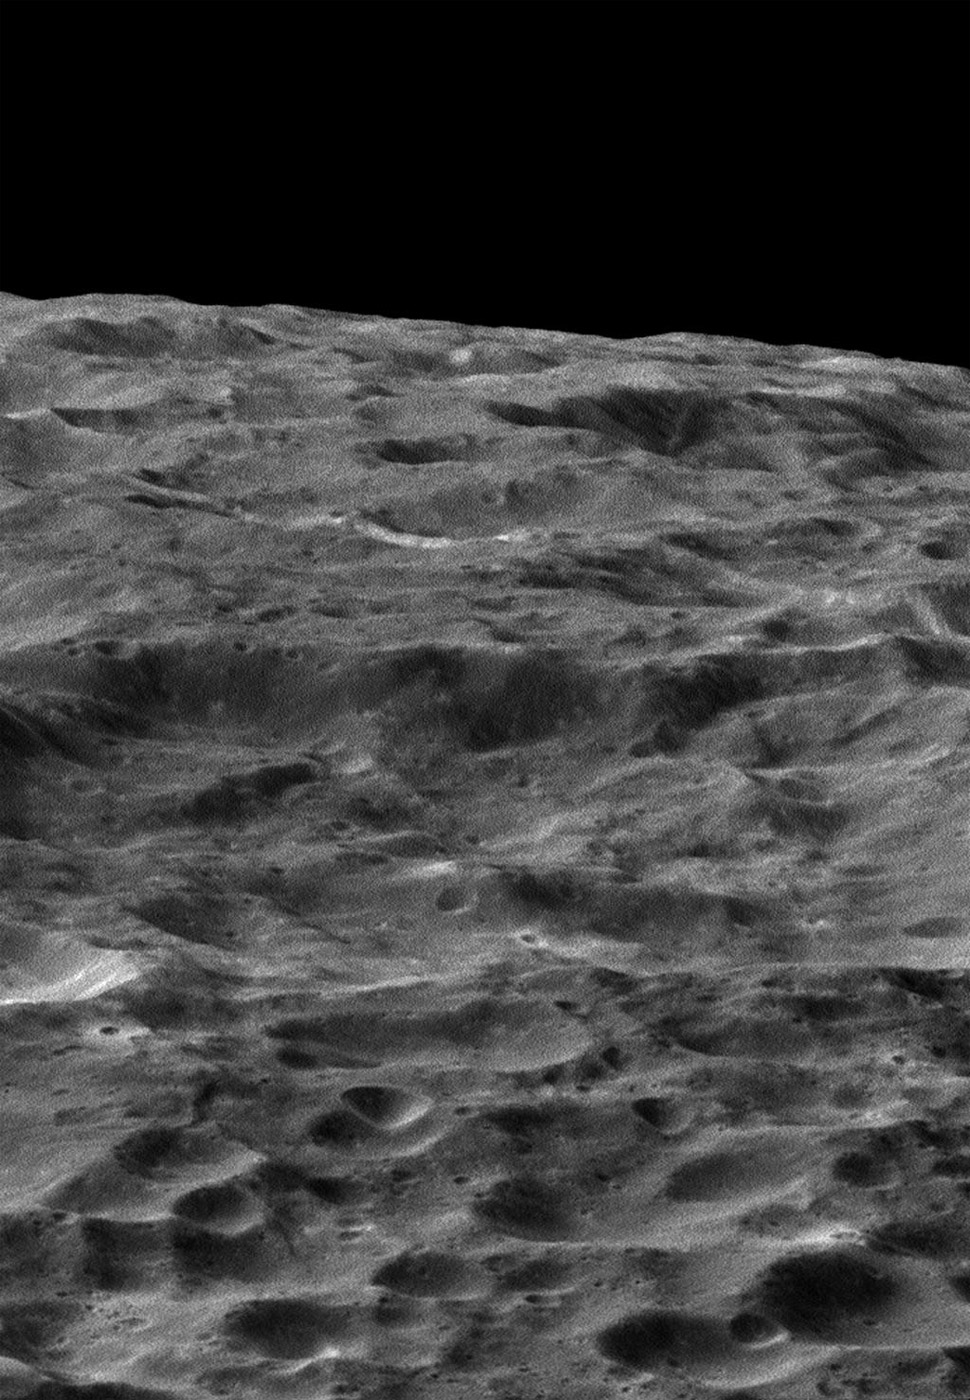 dione surface